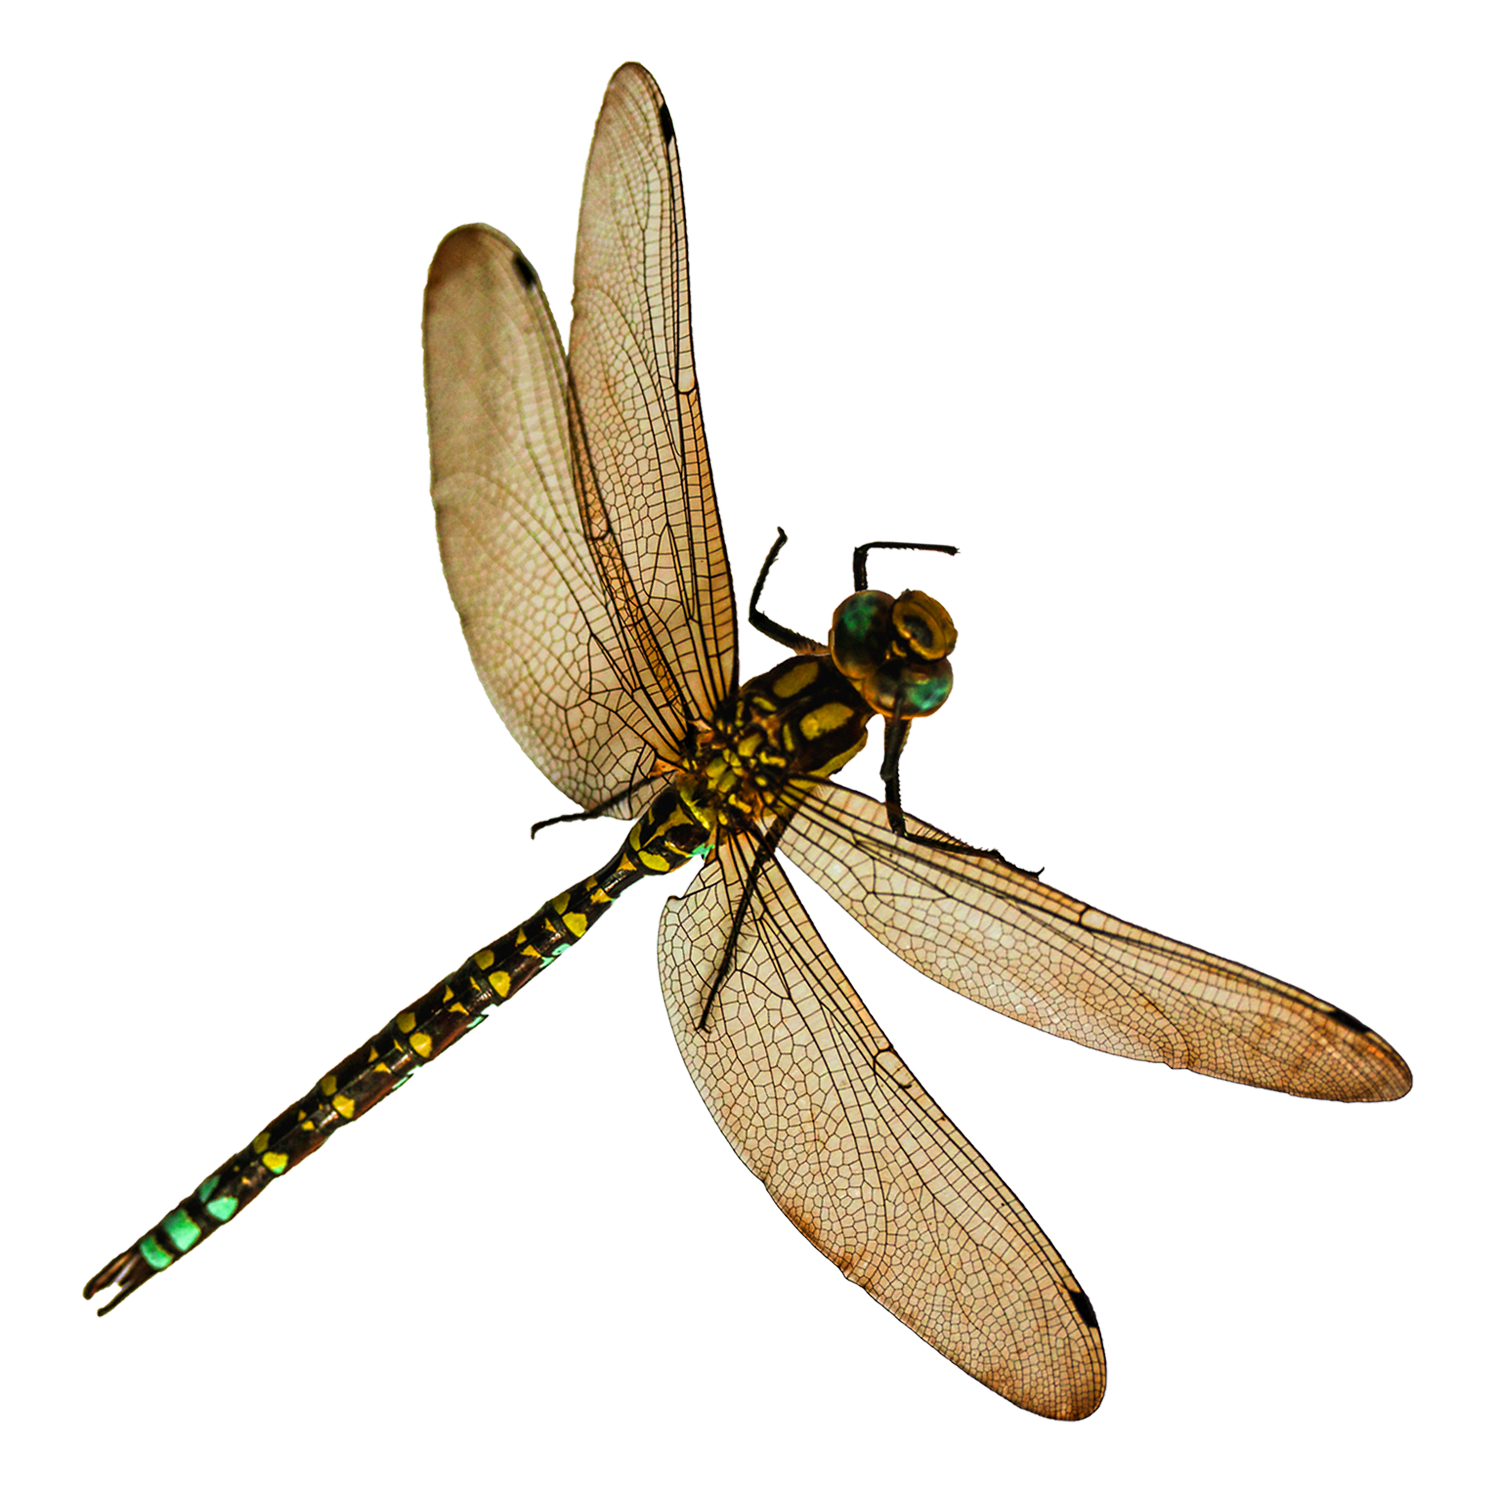 dragonfly clipart transparent background